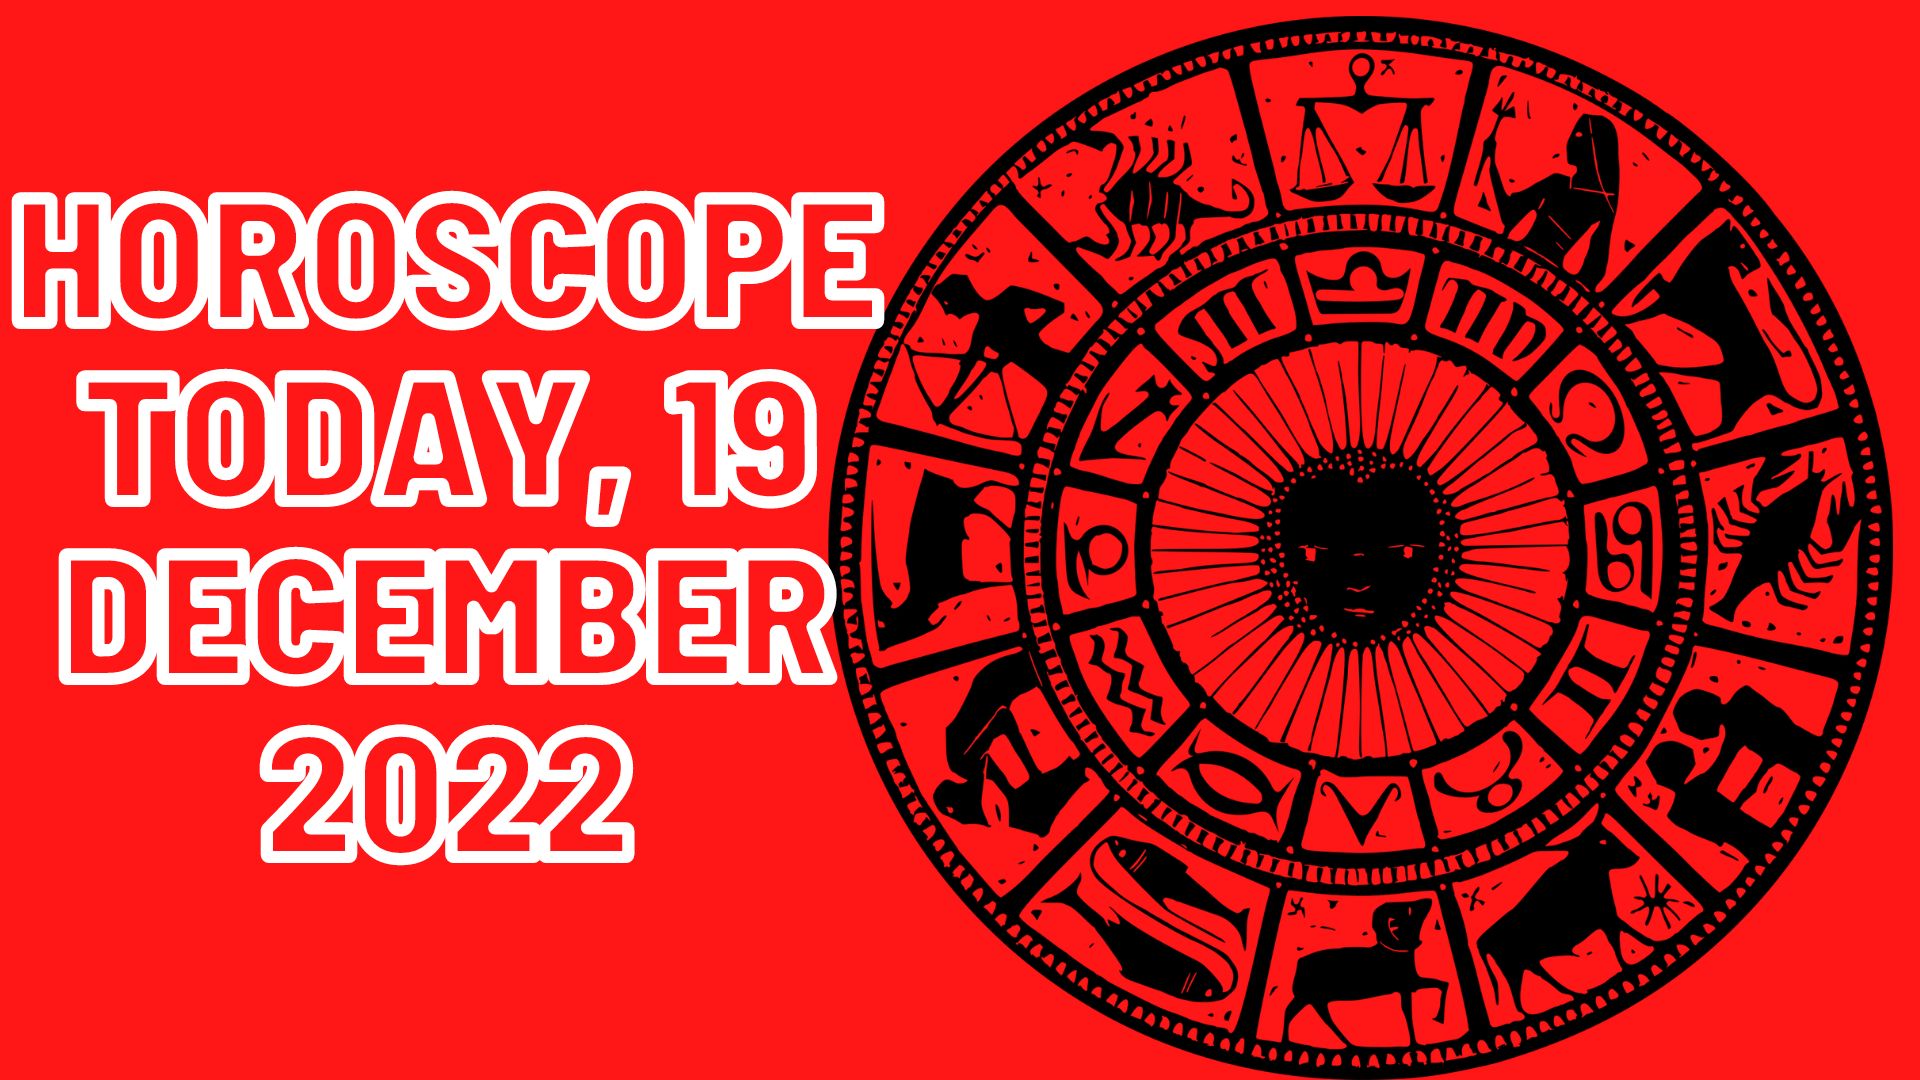 Horoscope Today, 19 December 2022 - Check Astrological Prediction Of Your Zodiac Sign